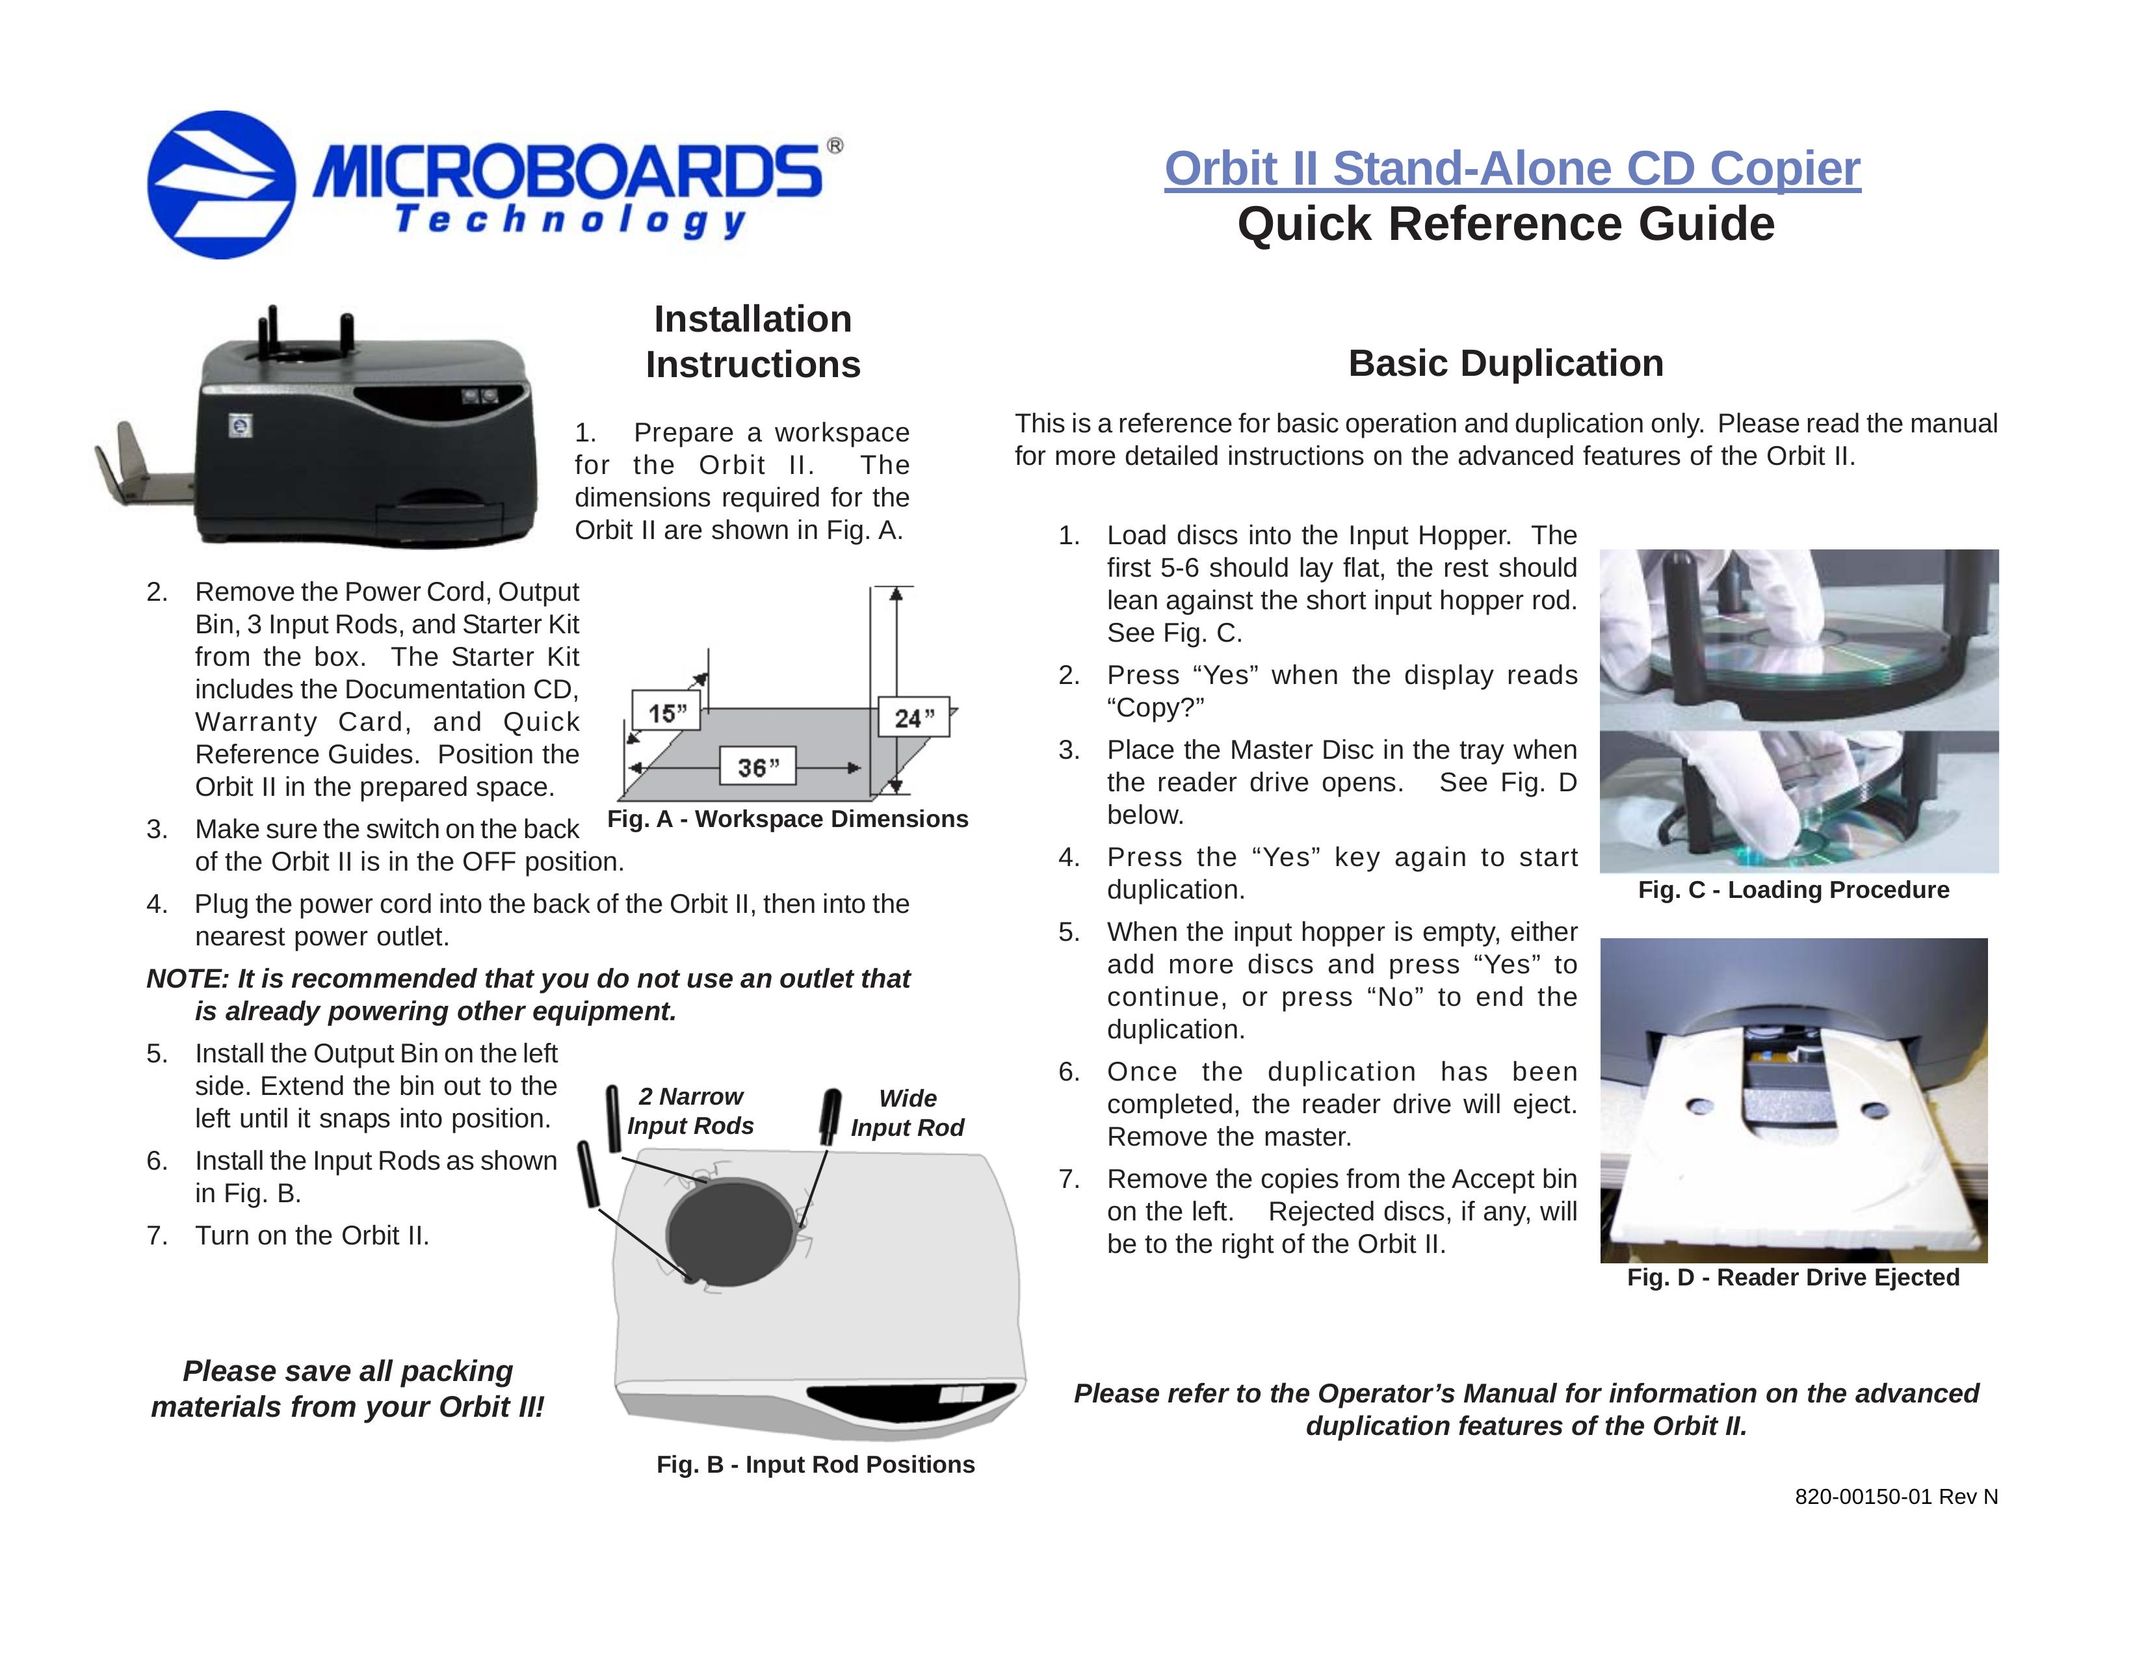 MicroBoards Technology 820-00150-01 DVD Recorder User Manual